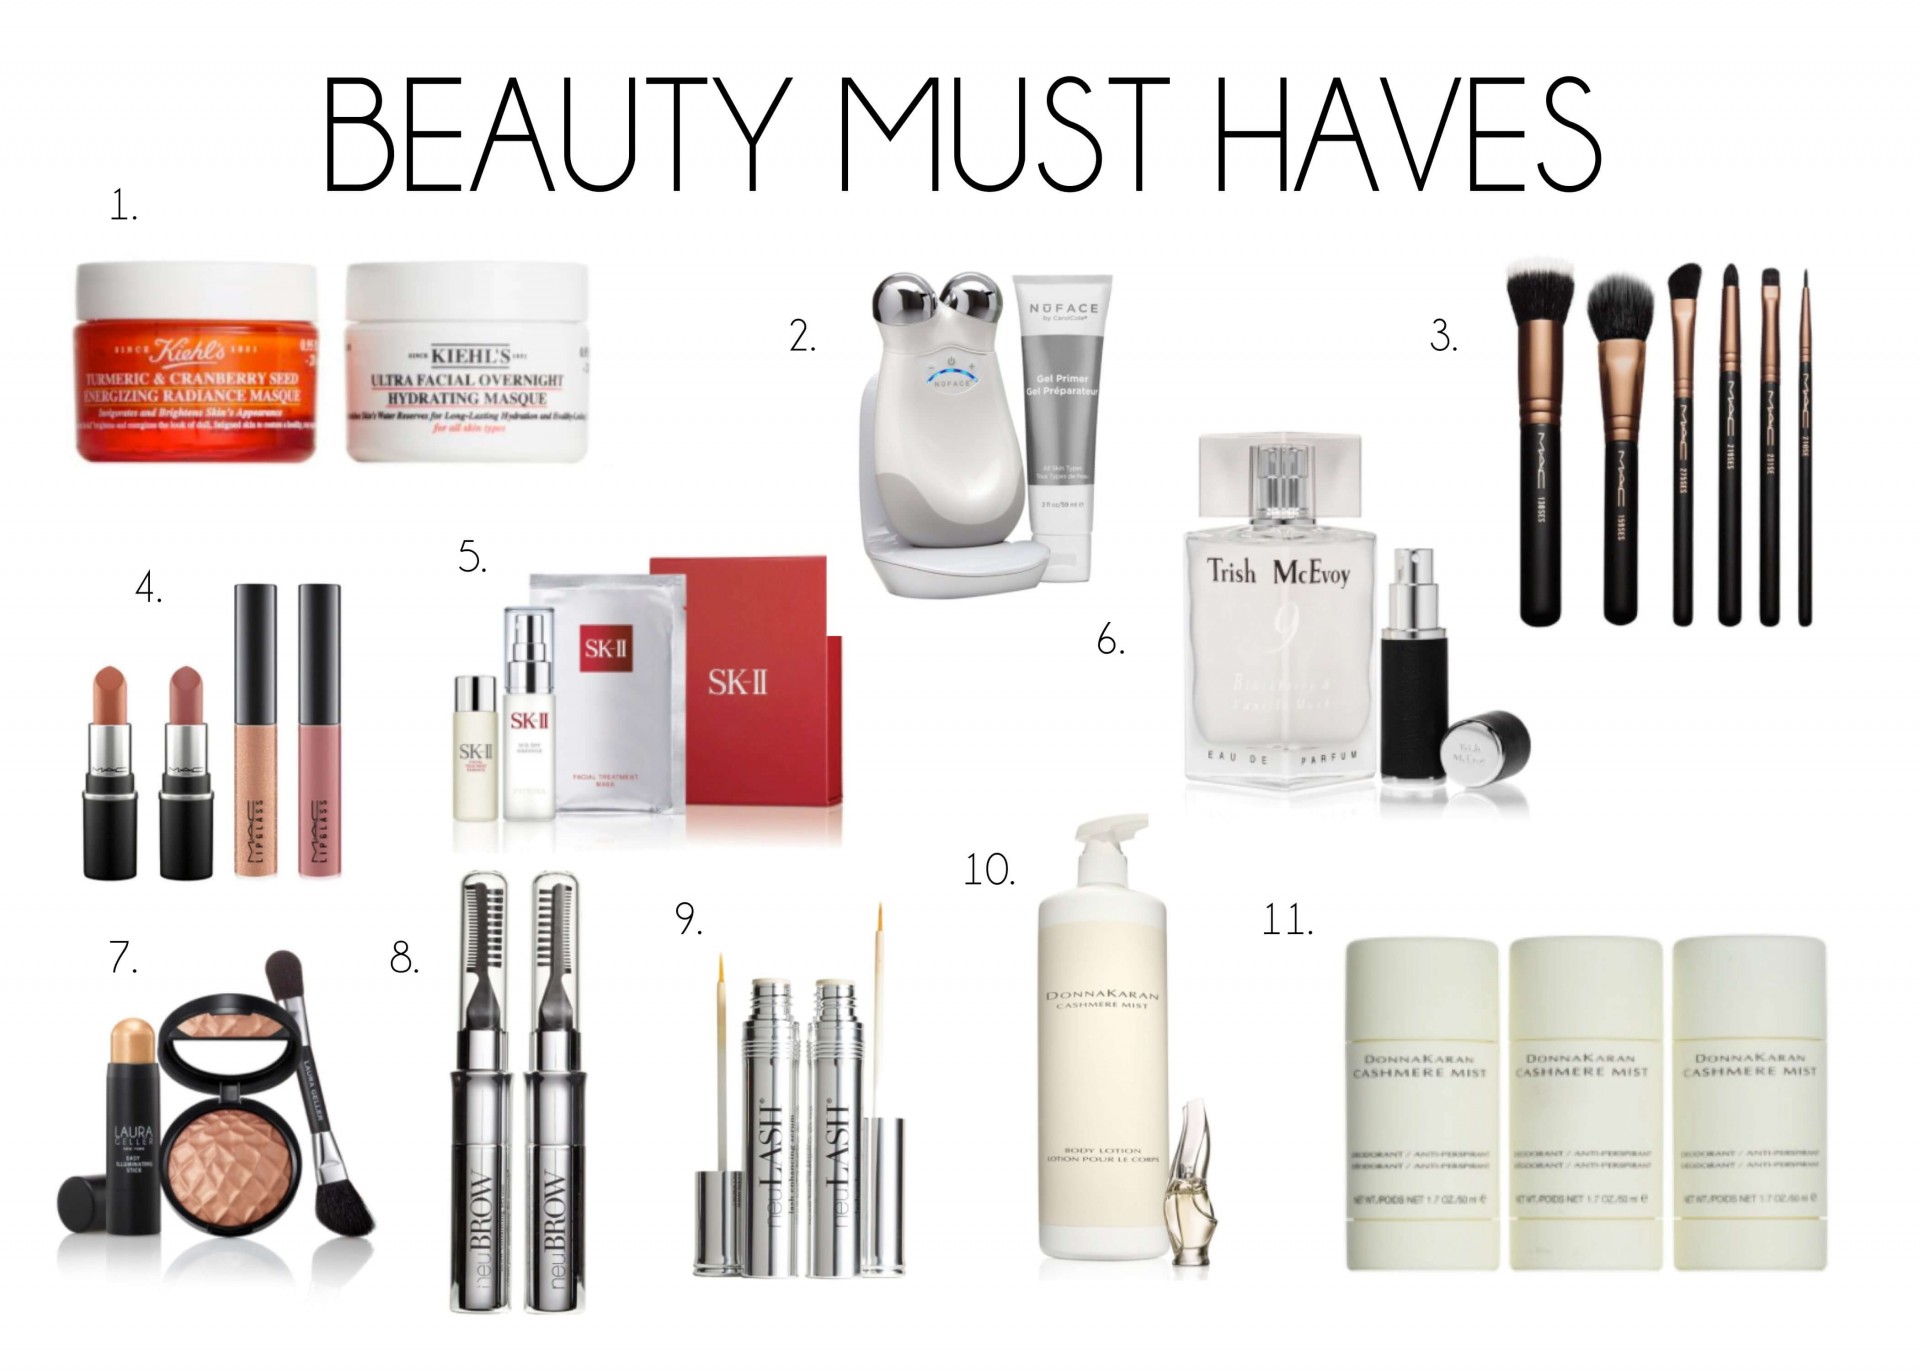 BEAUTY MUST HAVES